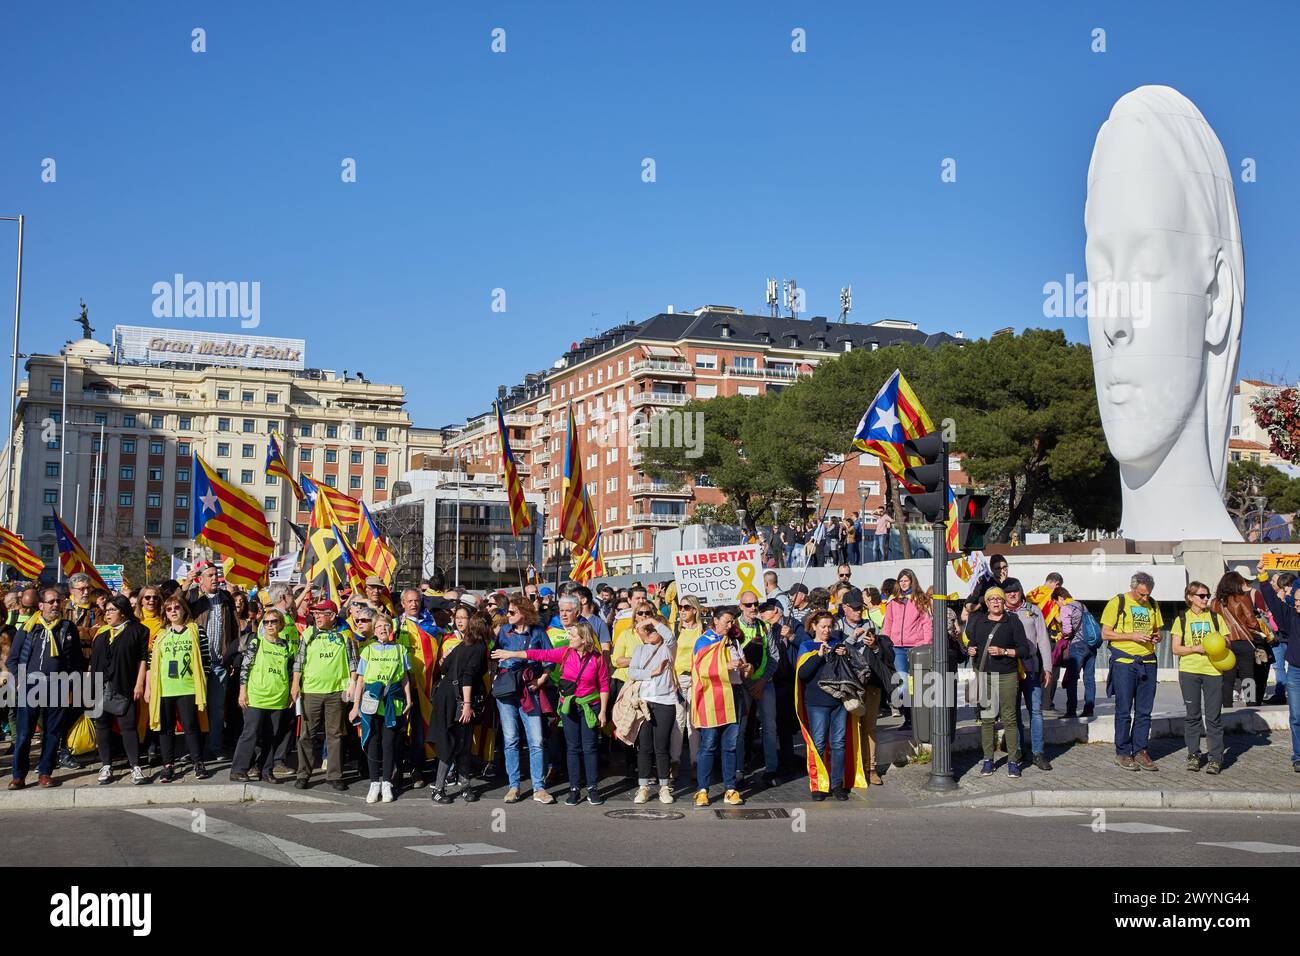 Manifestation of Catalans demanding independence, Flags of Catalonia, 'Julia', sculpture by Jaume Plensa, Colon Square, Madrid, Spain, Europe. Stock Photo